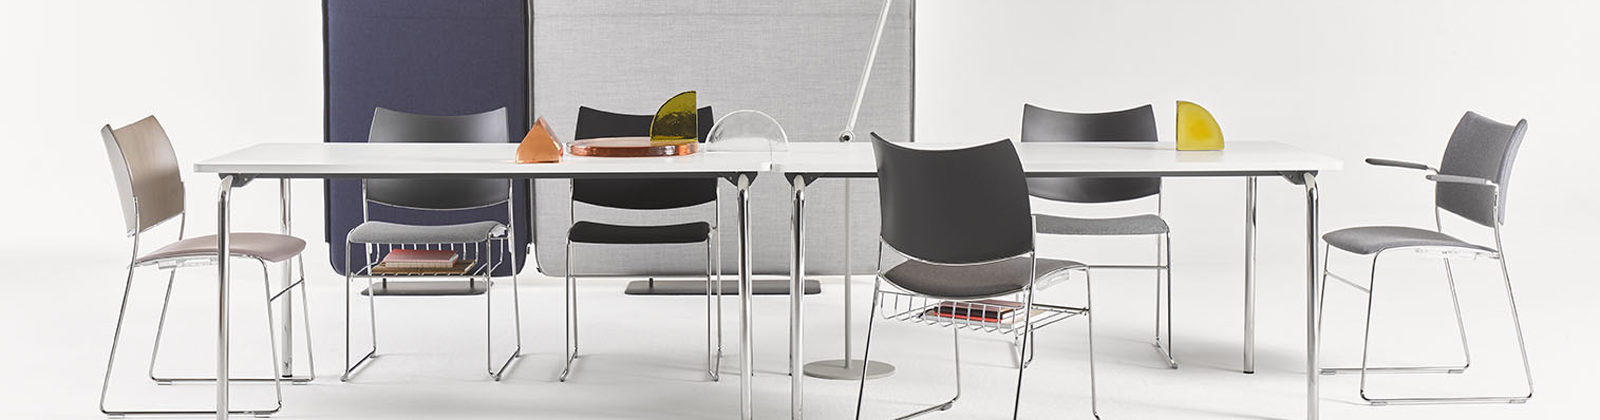 Curvy chairs at office meeting table